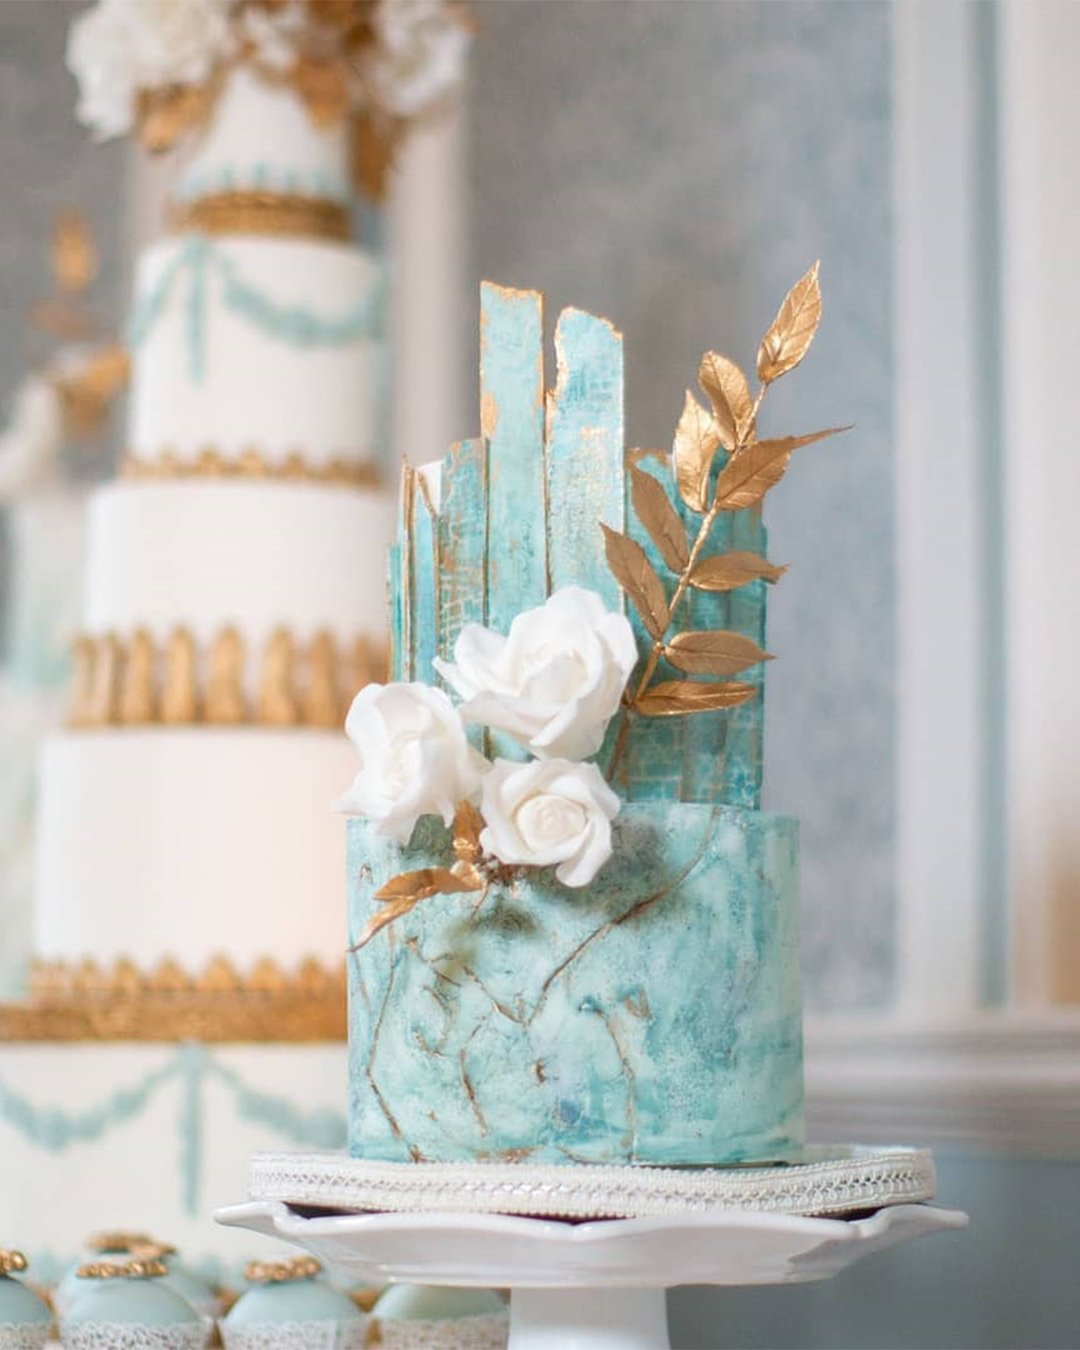 marble wedding cakes with metallic accents